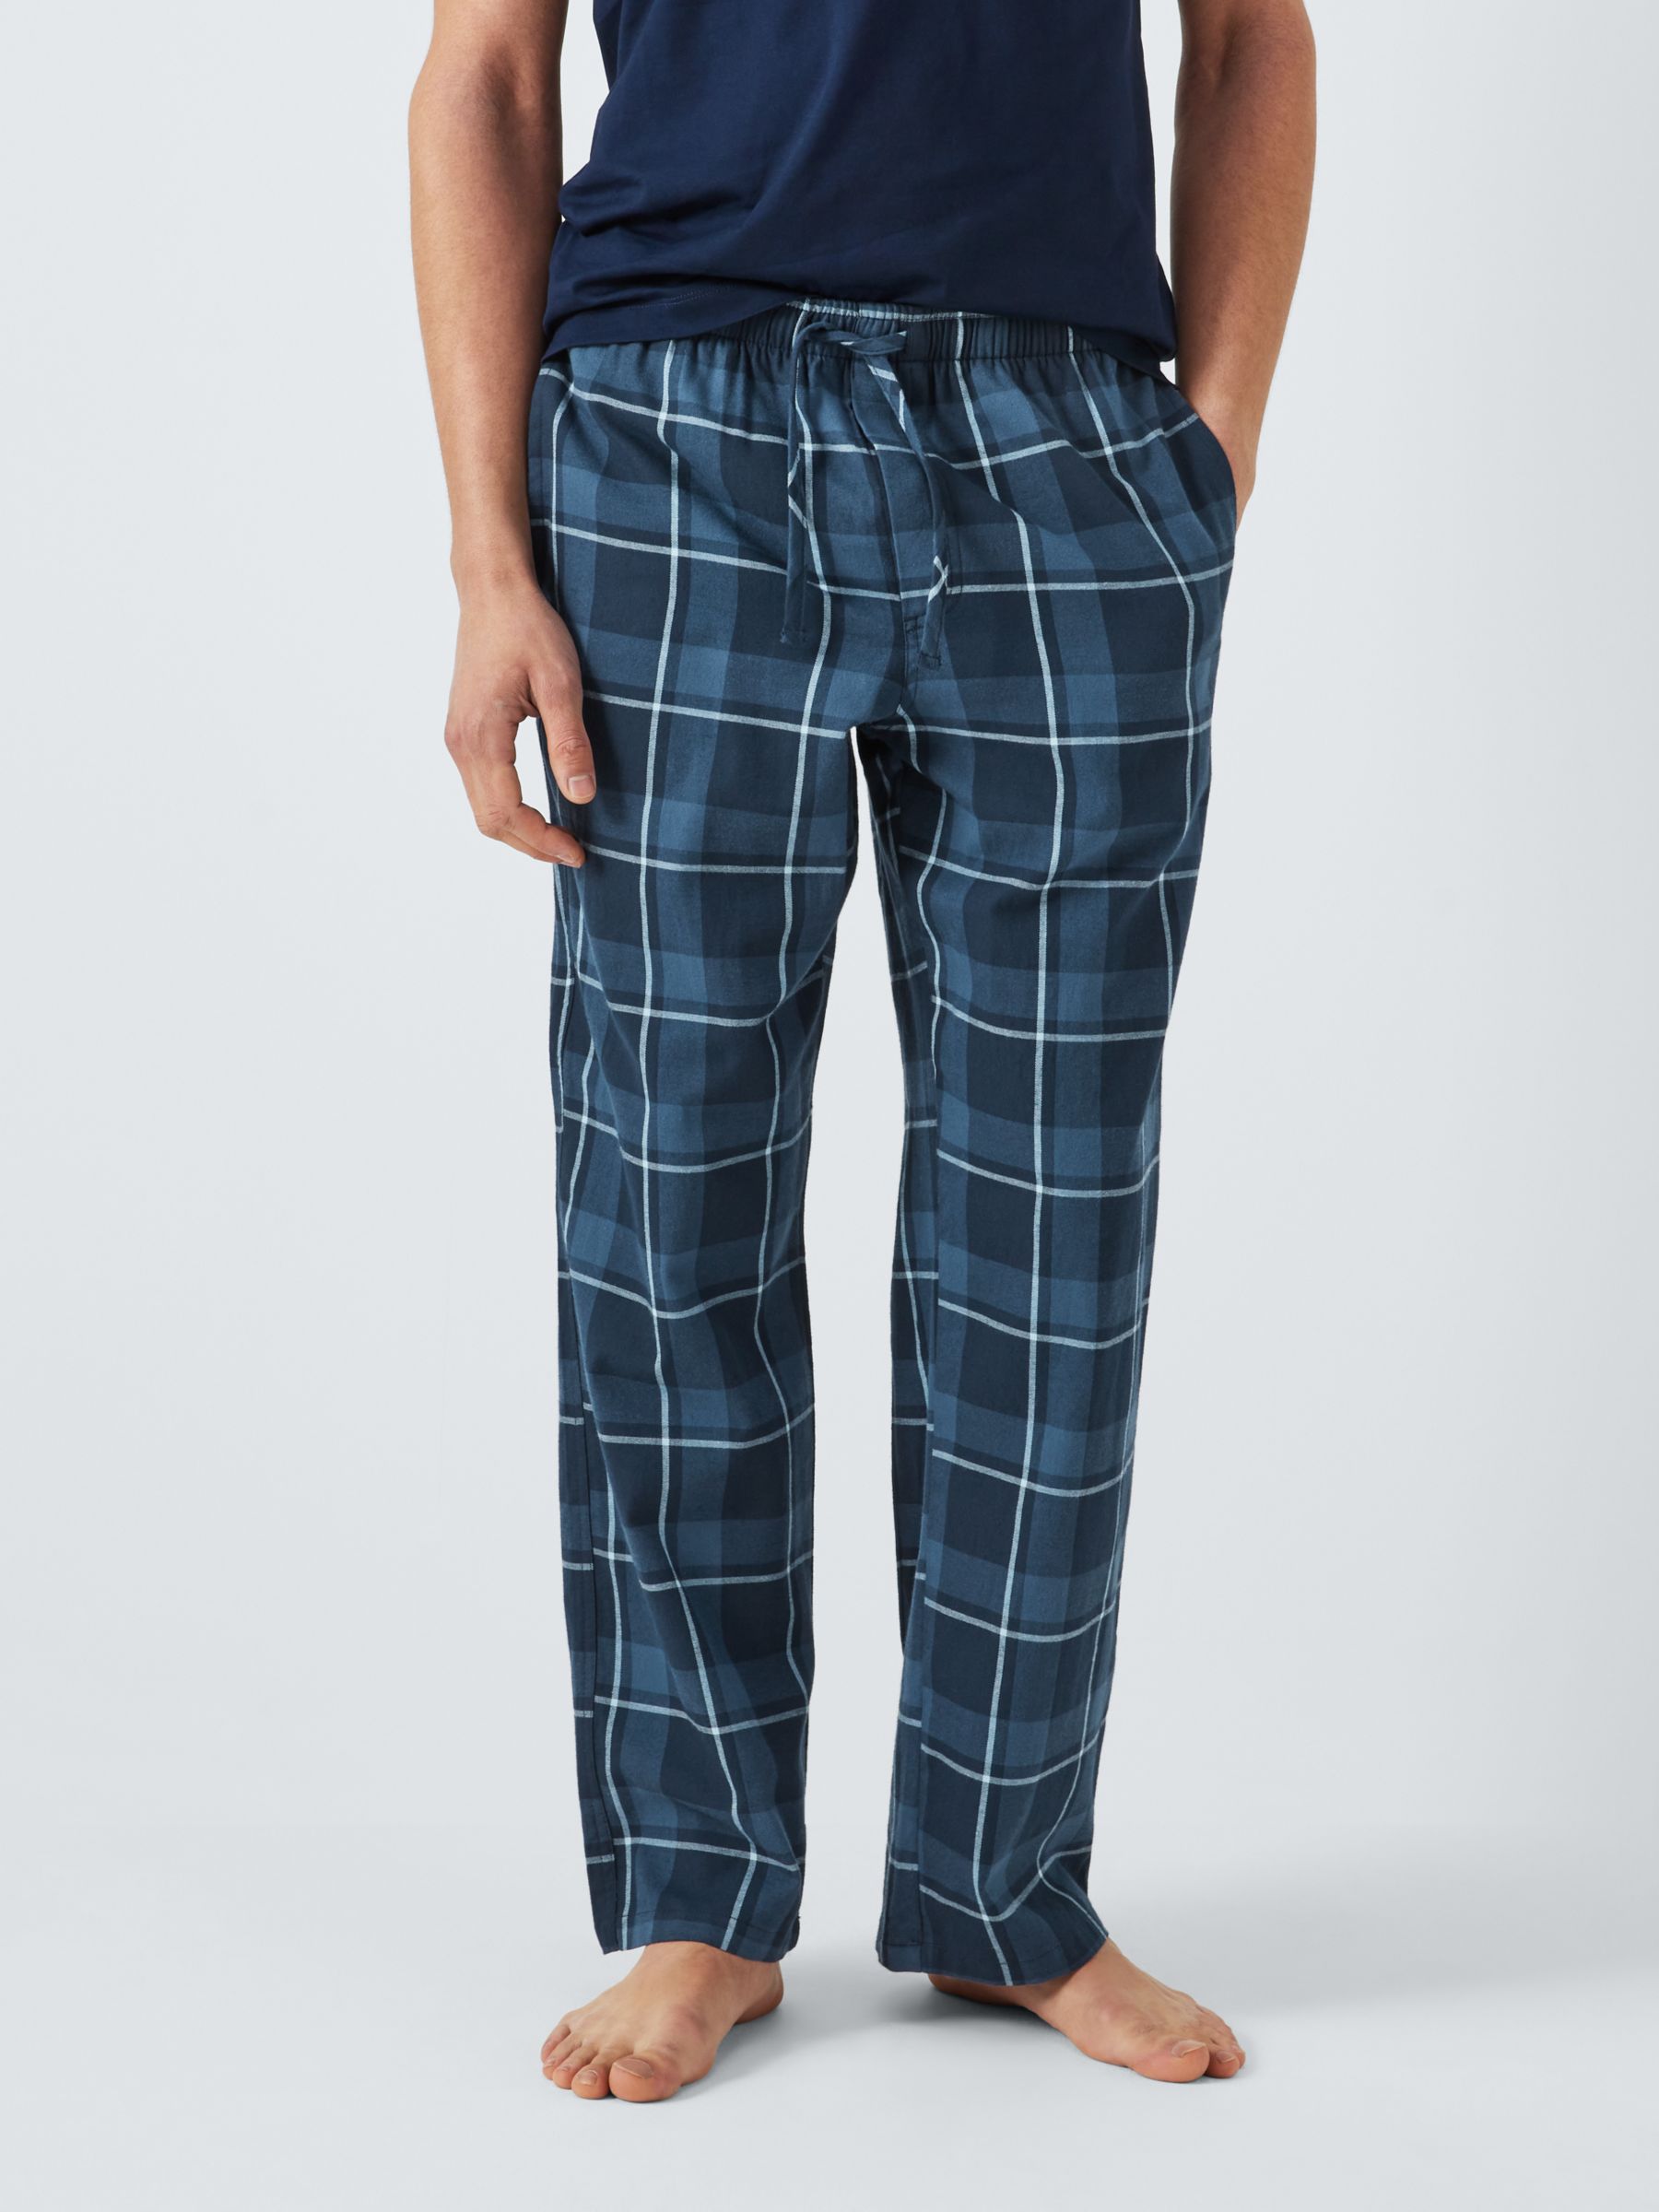 PJ Bottoms in Fine Cotton Pale Blue and Red Check